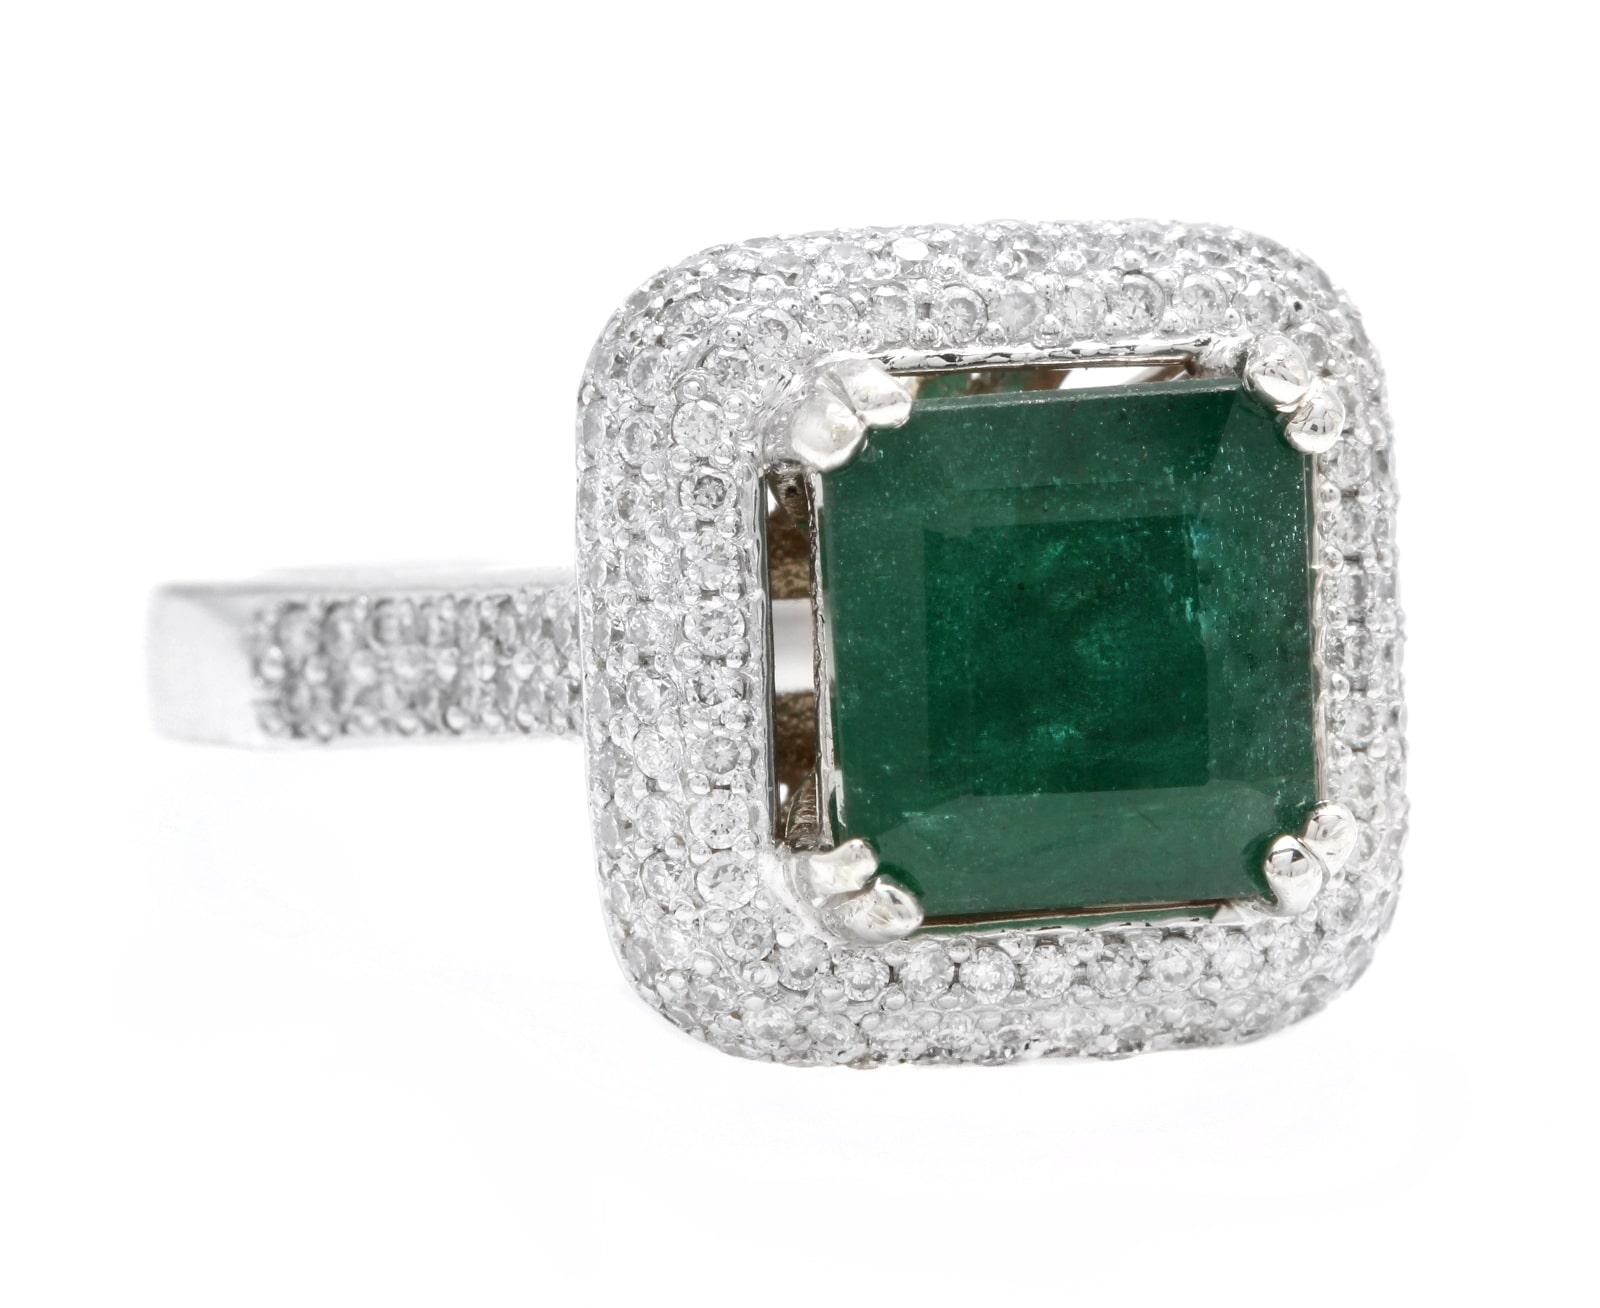 3.45 Carats Natural Emerald and Diamond 14K Solid White Gold Ring

Suggested Replacement Value: $6,000.00

Total Natural Green Emerald Weight is: Approx. 3.00 Carats (transparent)

Emerald Measures: Approx. 8.50 x 8.30mm

Natural Round Diamonds